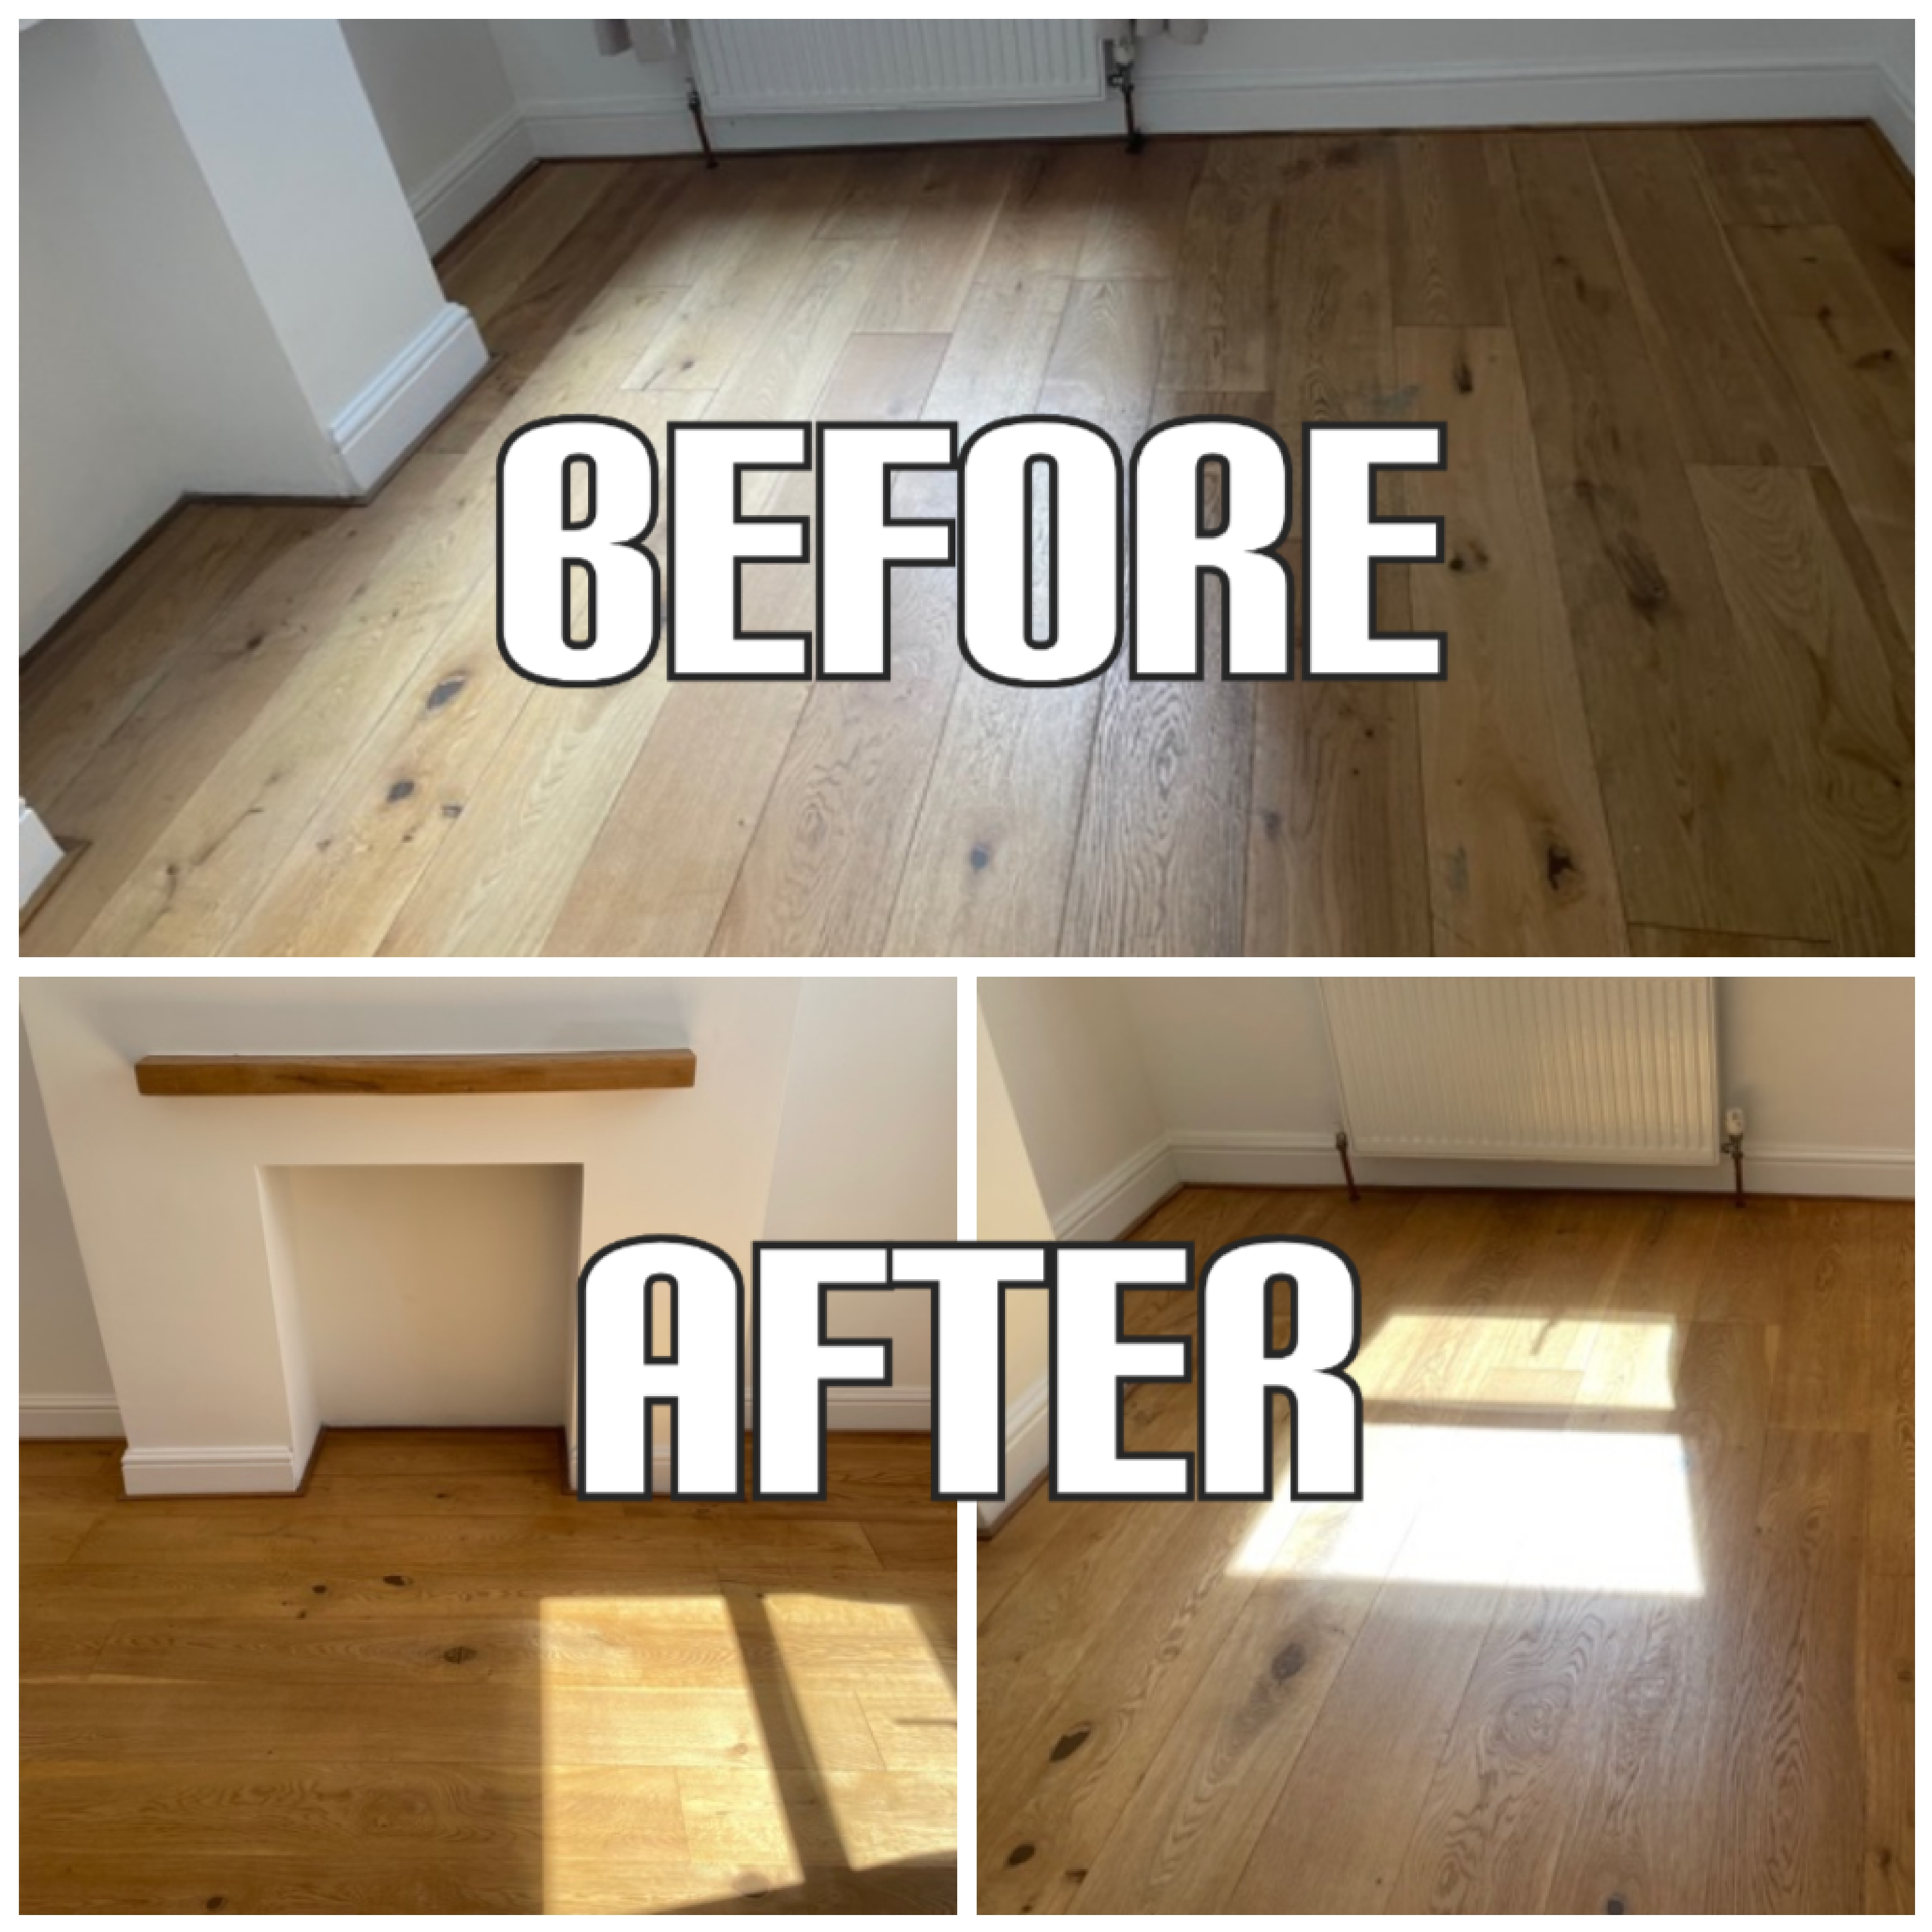 before and after Solid wood floor sanding, gap filling, staining, and finishing with satin lacquer in a house, Surrey